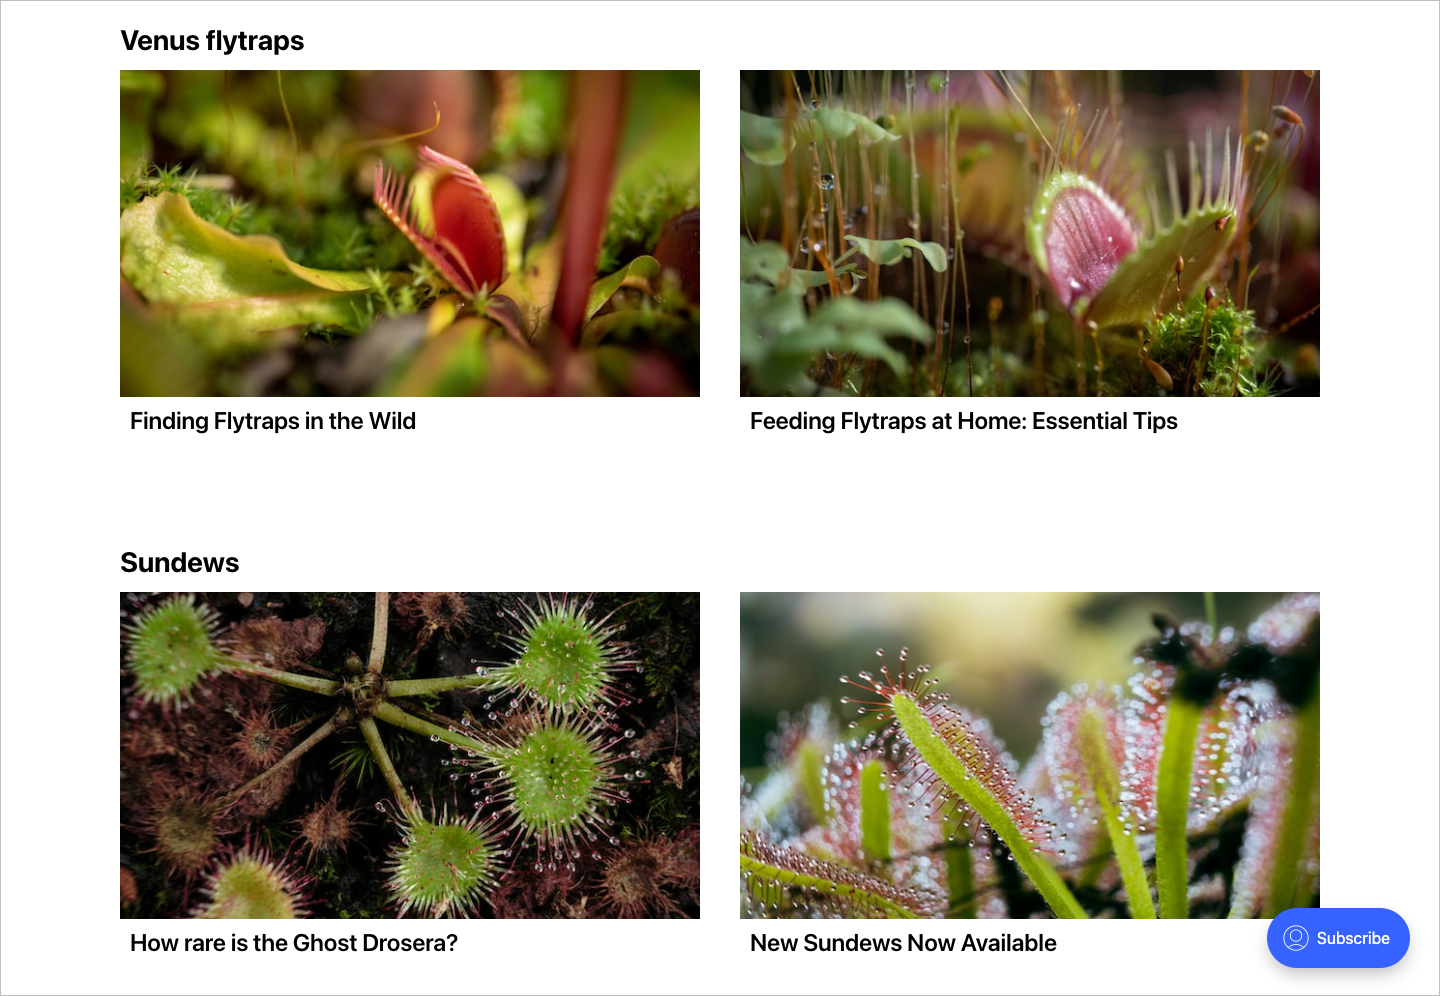 Custom home page with sections devoted to different species of carnivorous plants